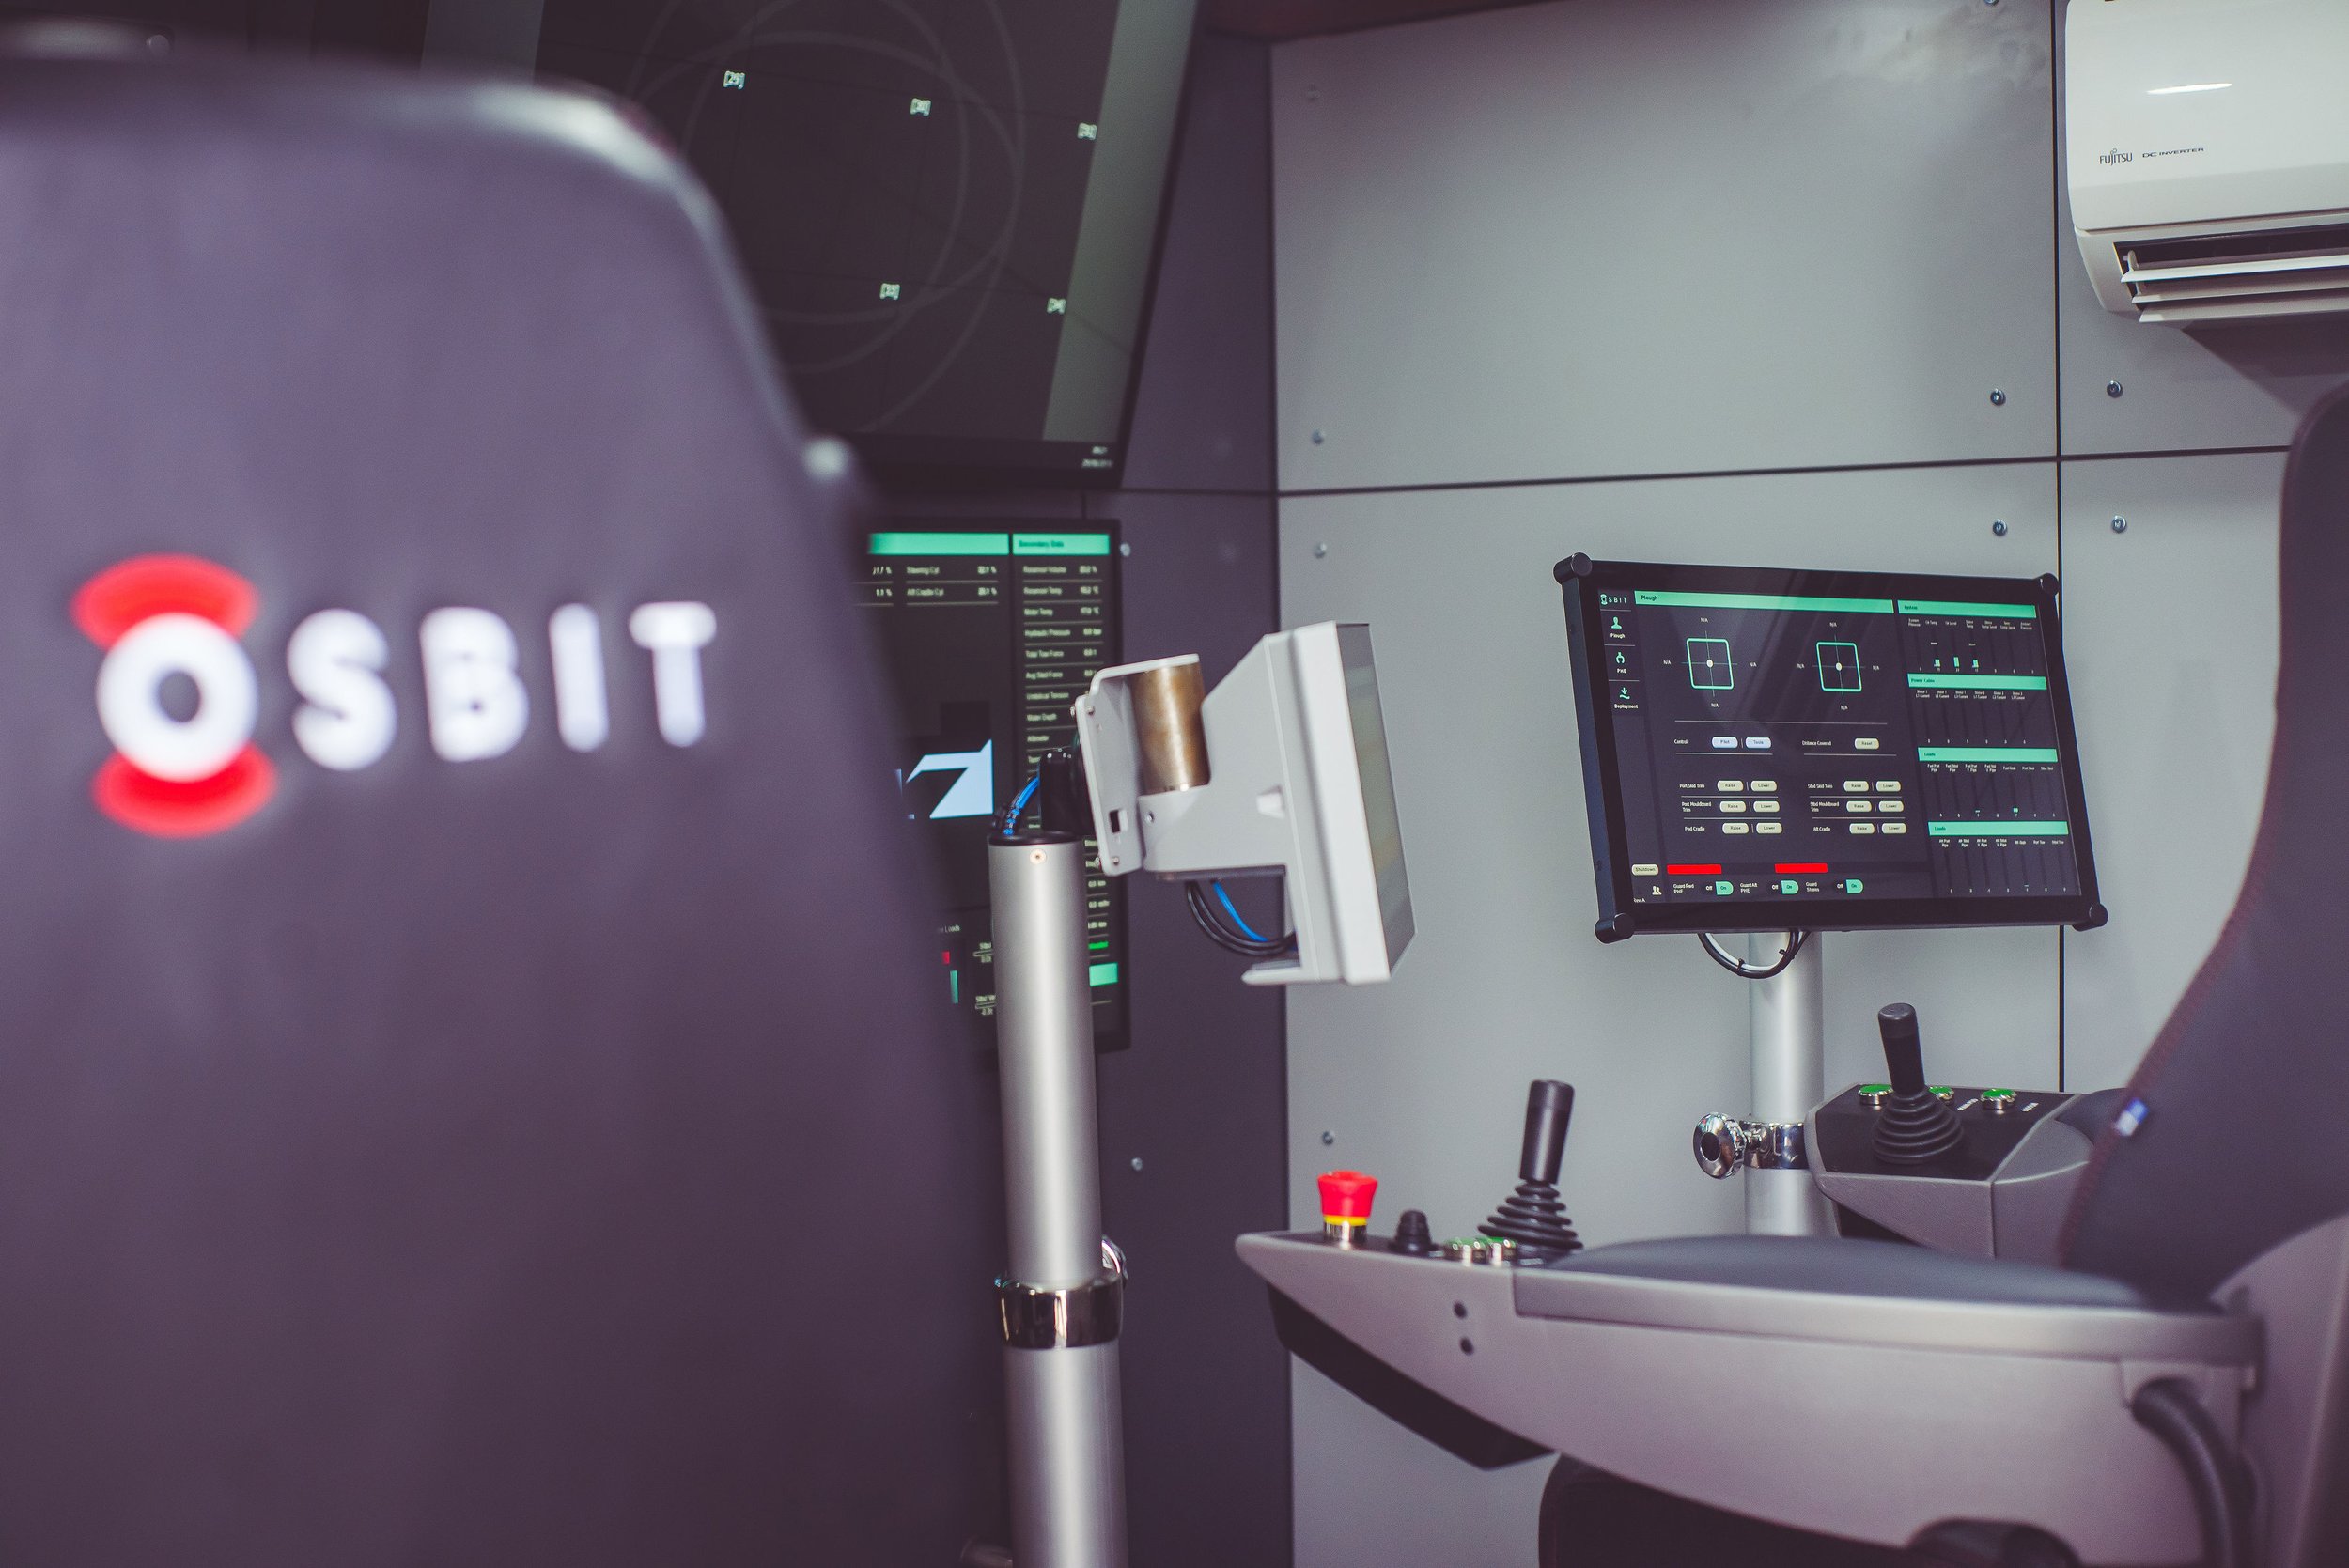 Osbit control chairs and equipment